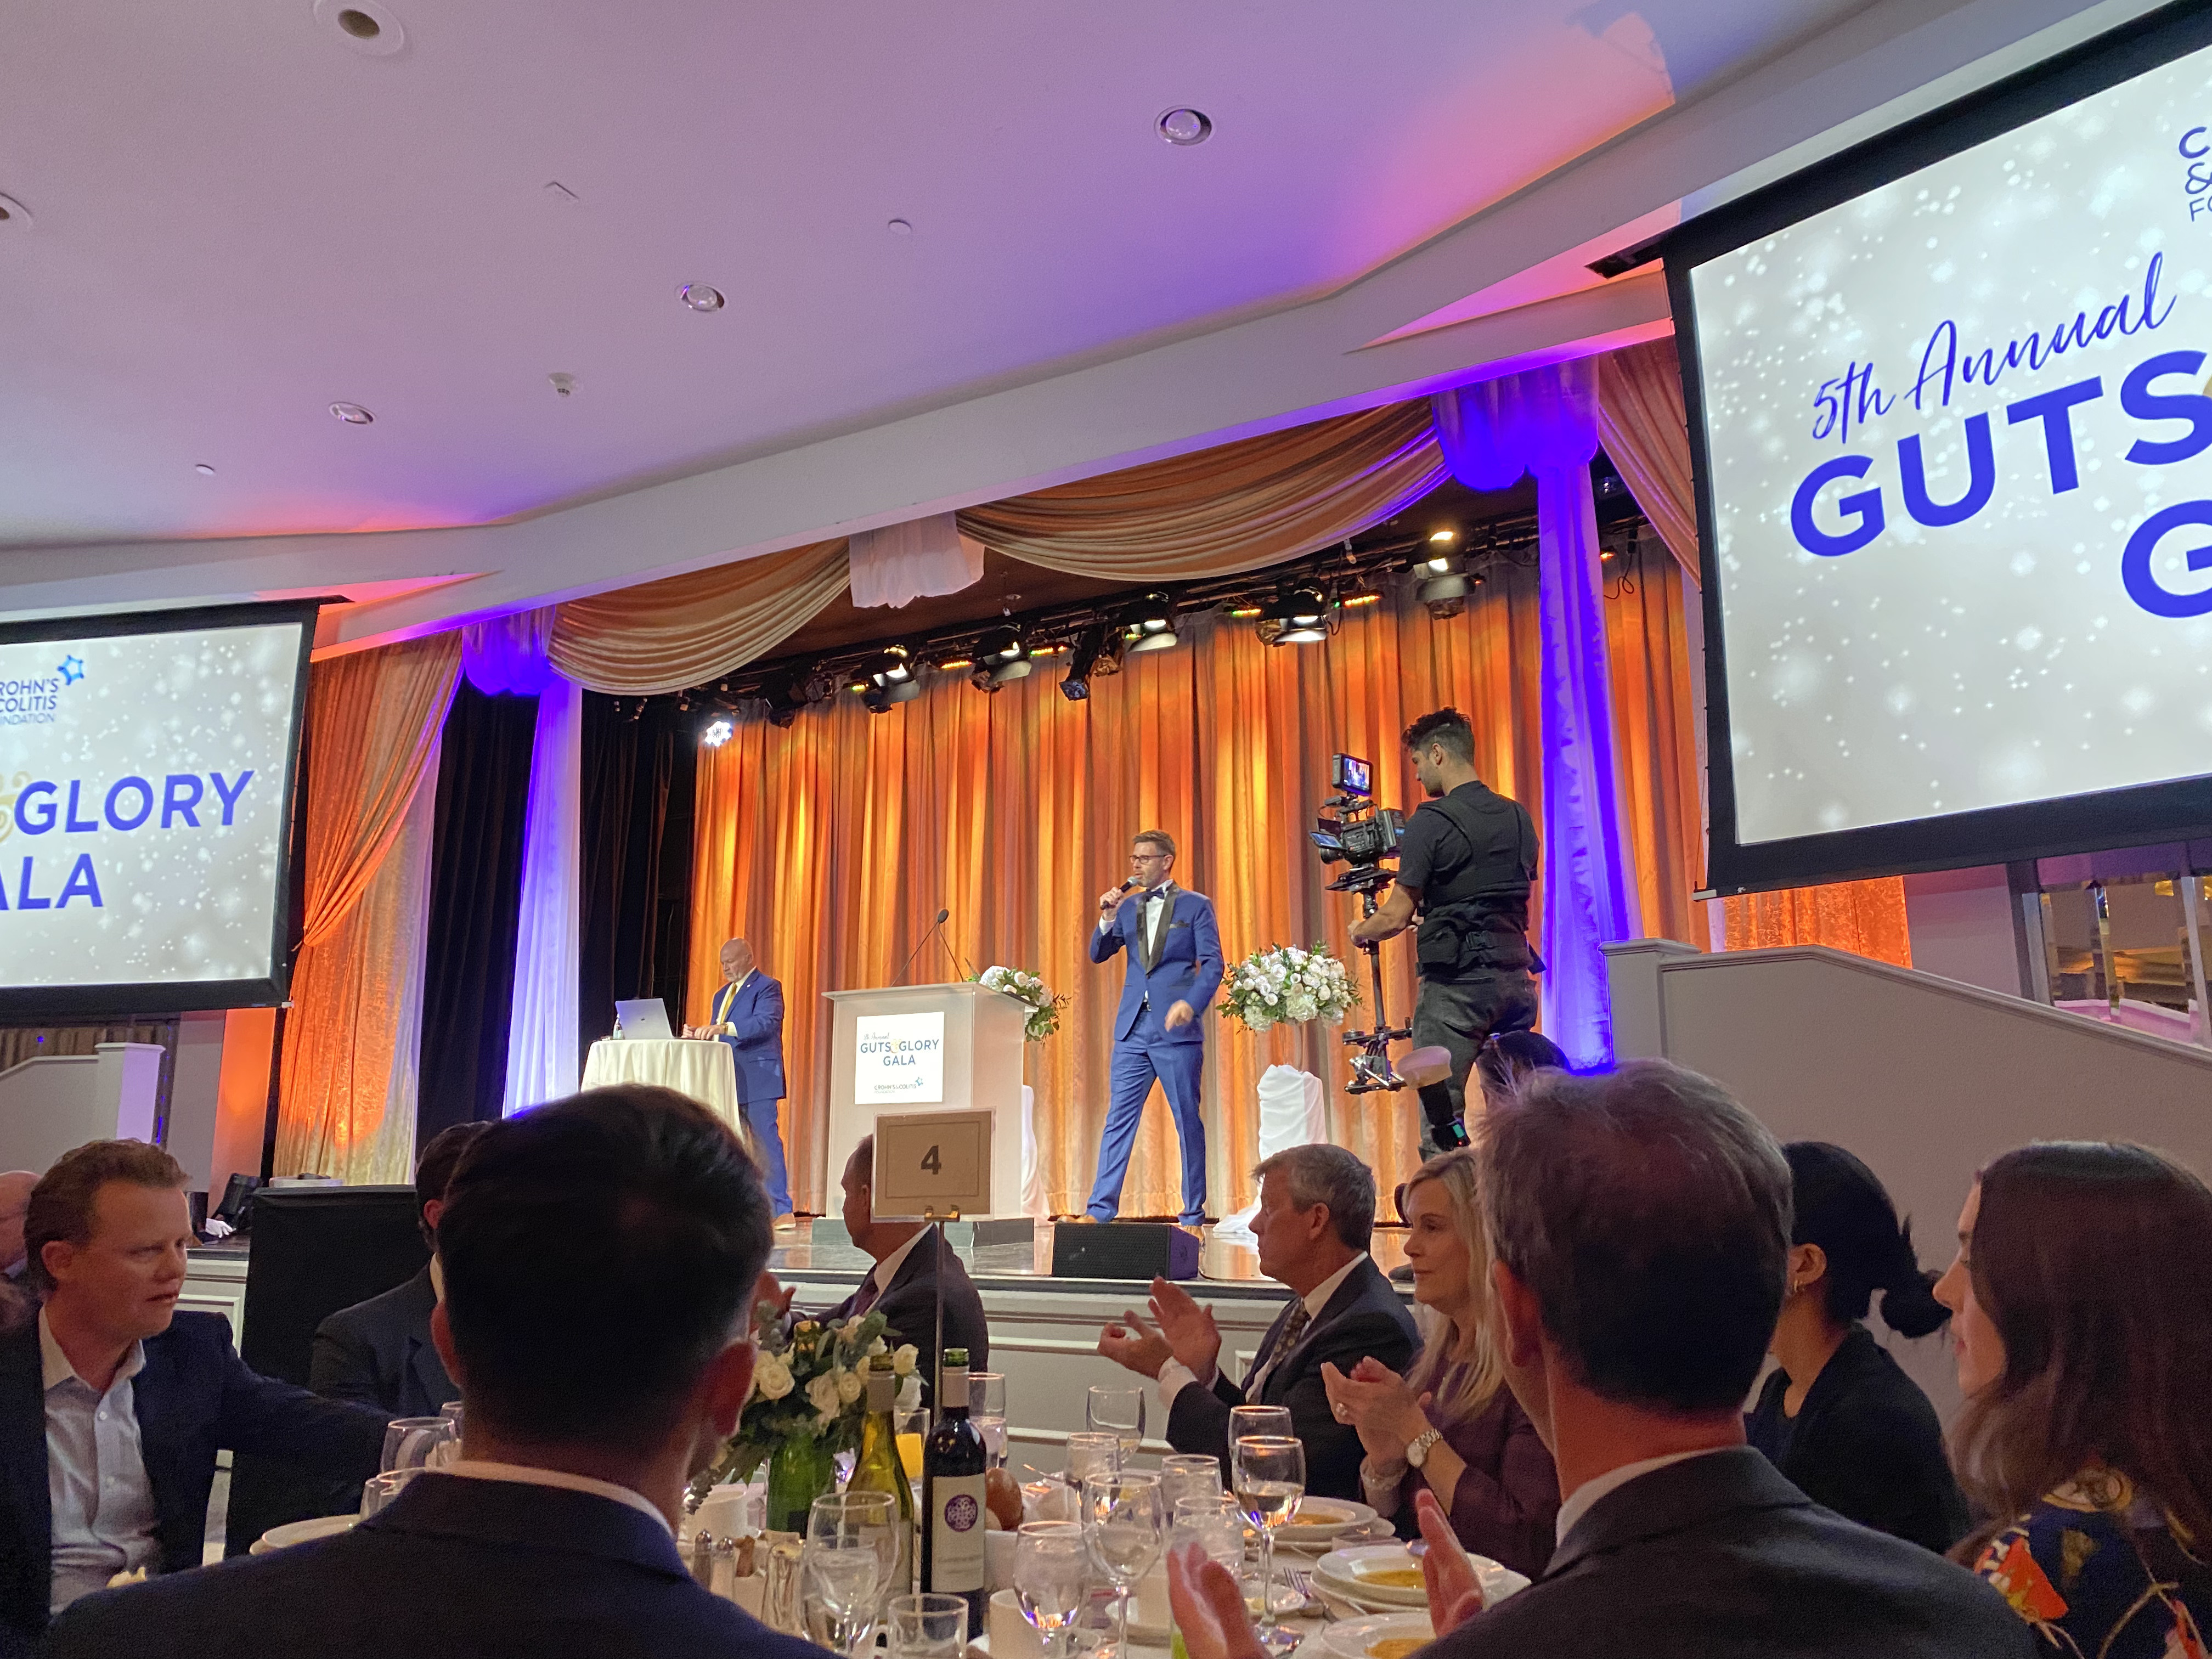 RxSugar Proudly Sponsors The Crohn's & Colitis Foundation's 5th Annual Guts & Glory Gala